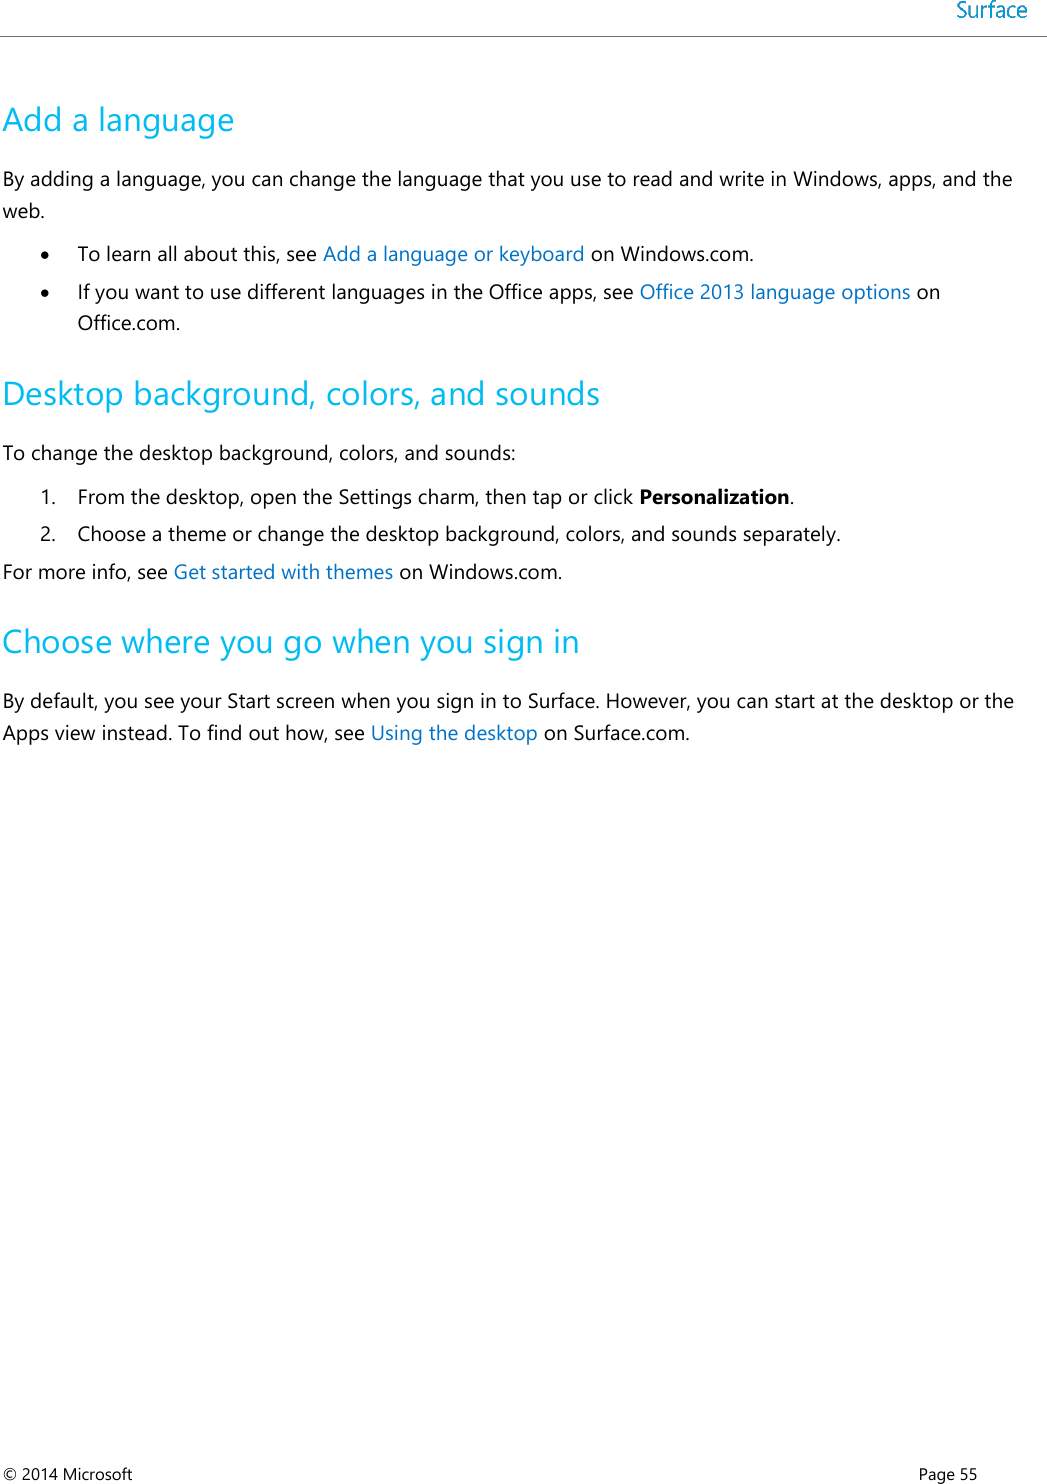  © 2014 Microsoft      Page 55  Add a language By adding a language, you can change the language that you use to read and write in Windows, apps, and the web.  To learn all about this, see Add a language or keyboard on Windows.com.   If you want to use different languages in the Office apps, see Office 2013 language options on Office.com. Desktop background, colors, and sounds To change the desktop background, colors, and sounds: 1. From the desktop, open the Settings charm, then tap or click Personalization.  2. Choose a theme or change the desktop background, colors, and sounds separately. For more info, see Get started with themes on Windows.com. Choose where you go when you sign in By default, you see your Start screen when you sign in to Surface. However, you can start at the desktop or the Apps view instead. To find out how, see Using the desktop on Surface.com.    